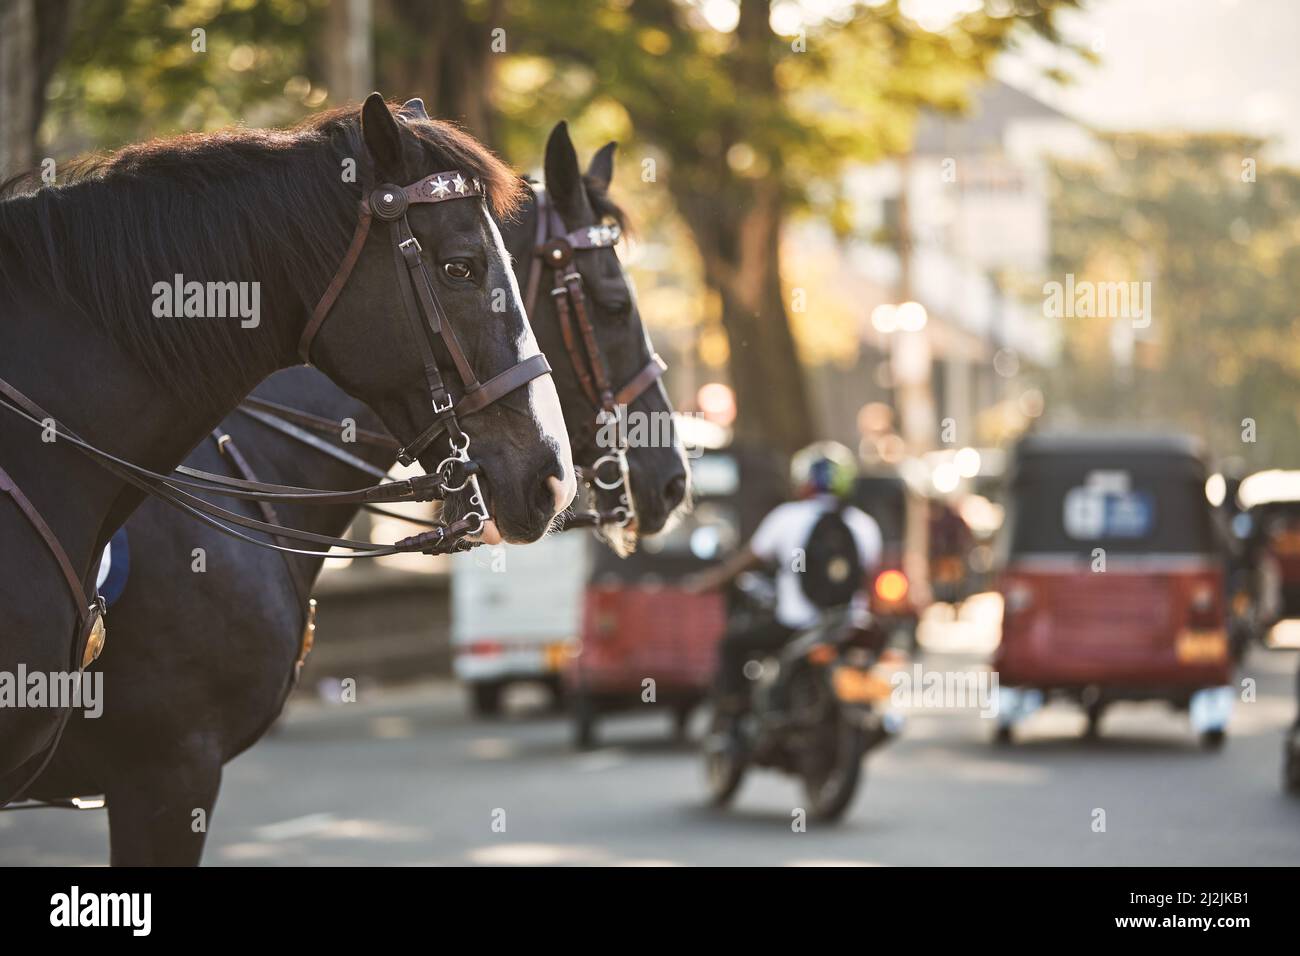 Horses of police patrol during traffic control in busy city center. Kandy in Sri Lanka. Stock Photo